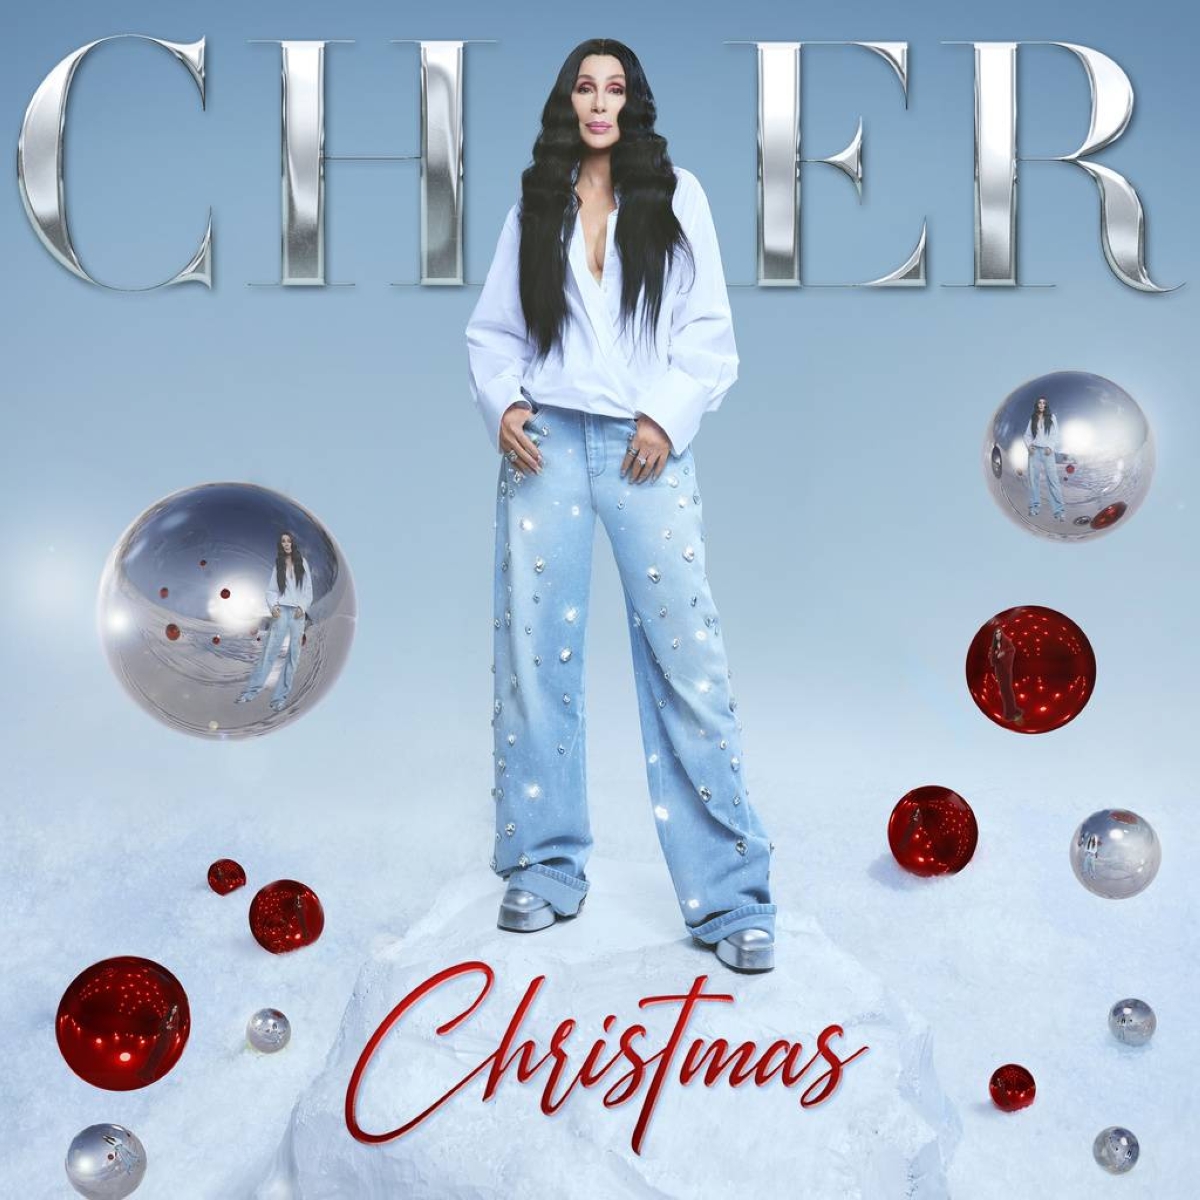 Cher in 'Christmas' mood with new album in five years The Manila Times